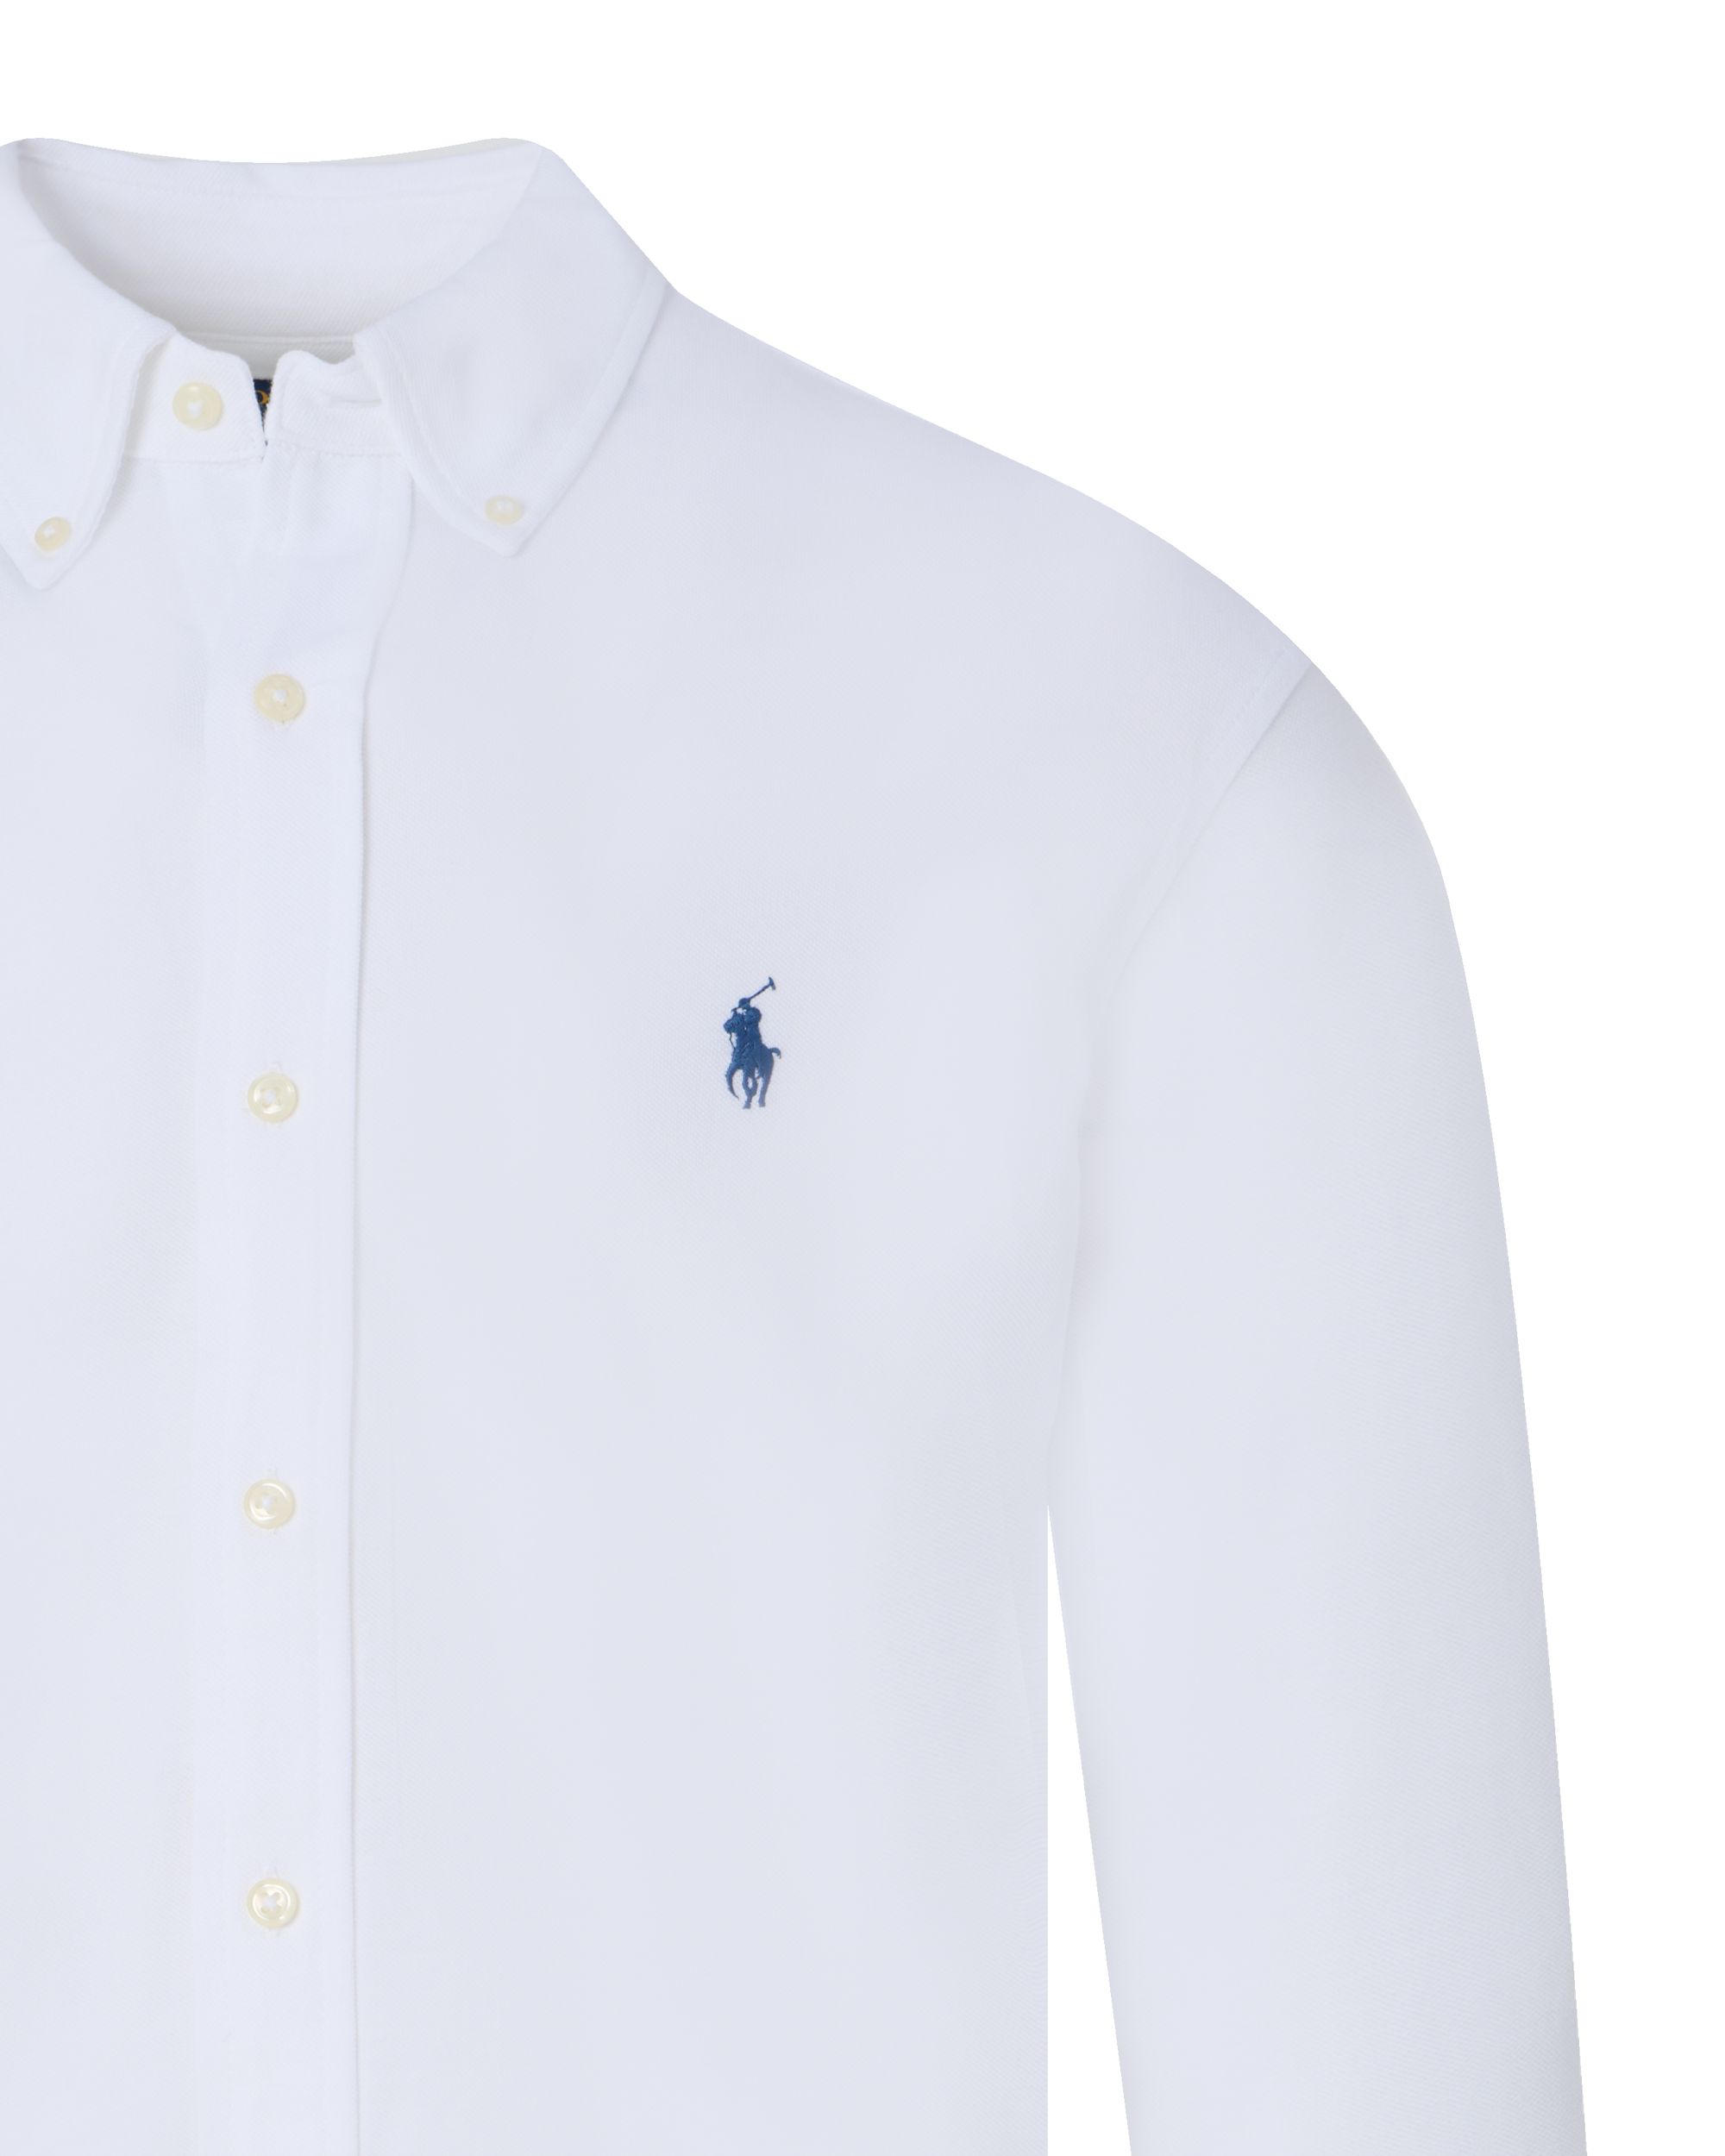 Polo Ralph Lauren Casual Overhemd LM Wit 095320-001-L